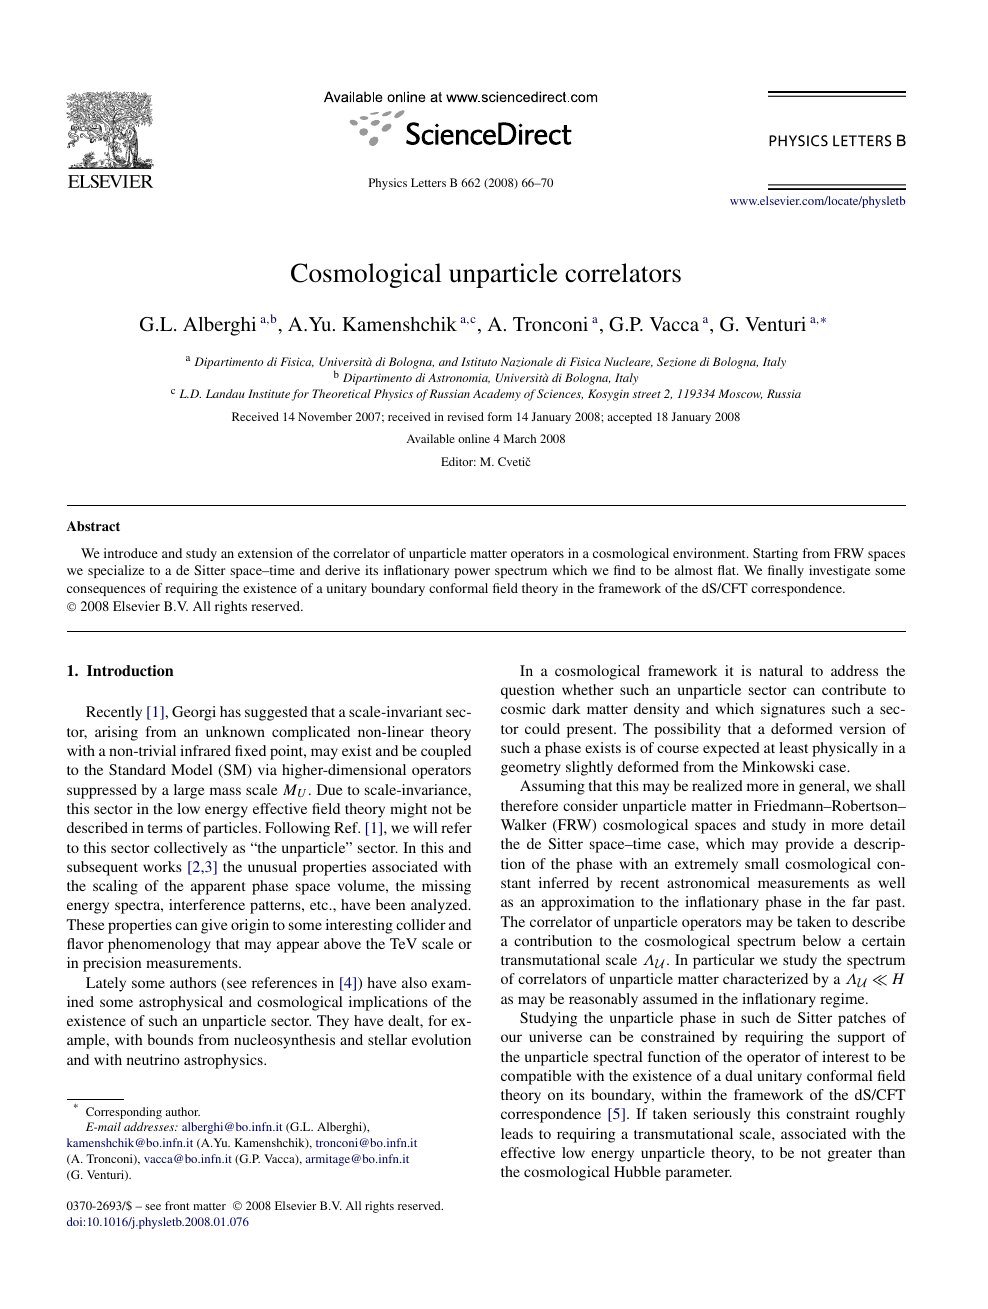 Cosmological Unparticle Correlators Topic Of Research Paper In Physical Sciences Download Scholarly Article Pdf And Read For Free On Cyberleninka Open Science Hub